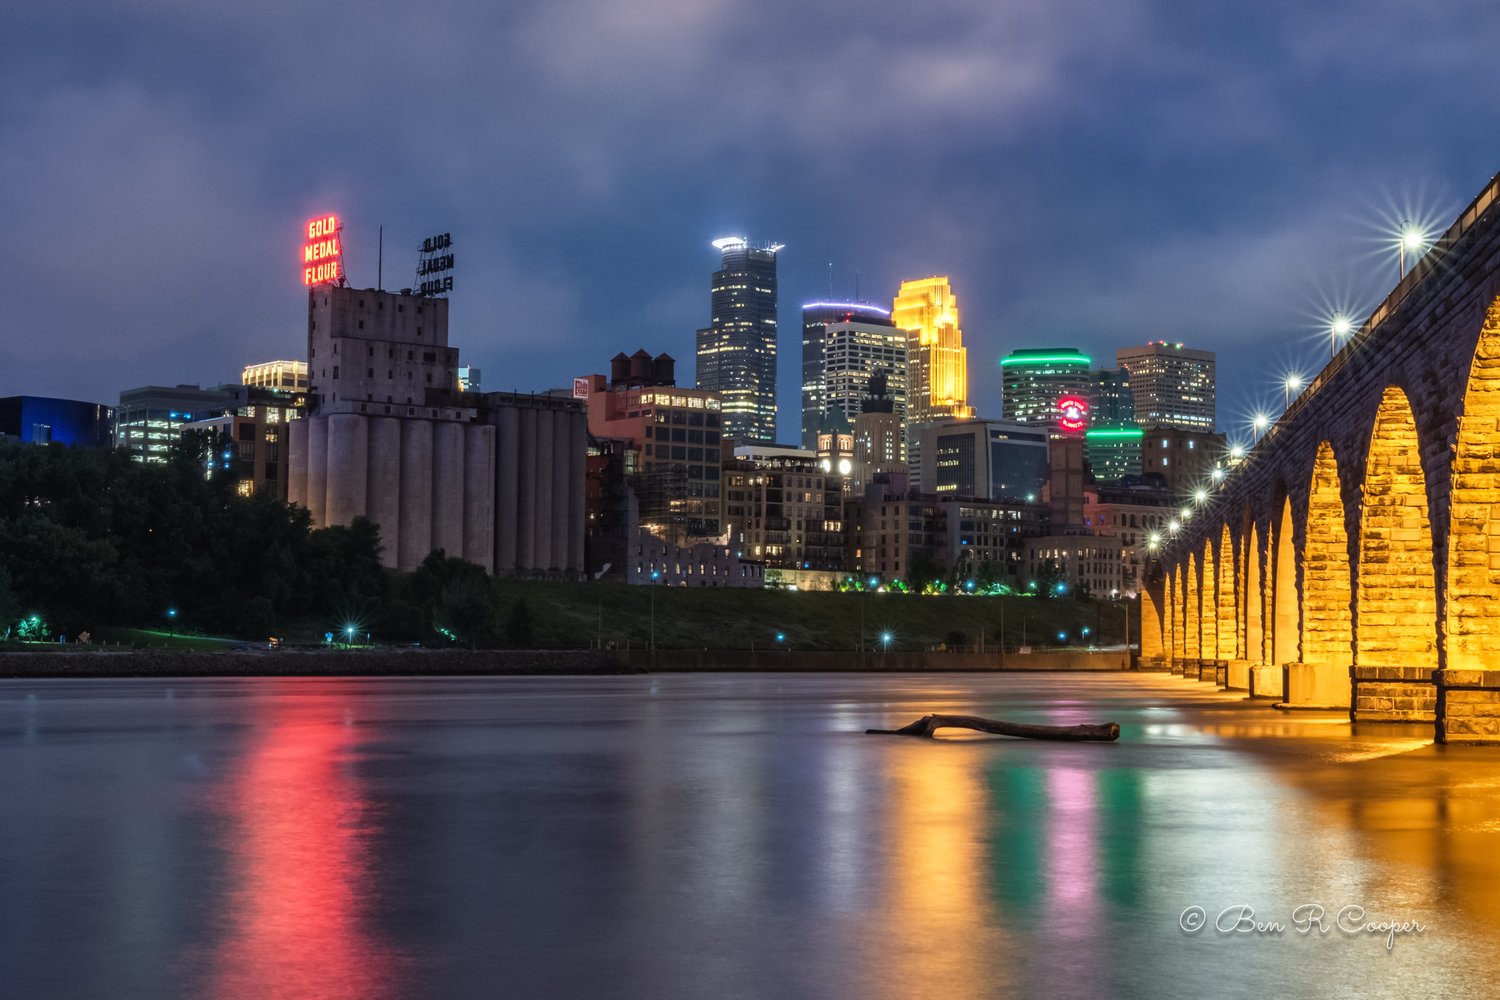 Stone Arch Bridge During the “Blue hour”